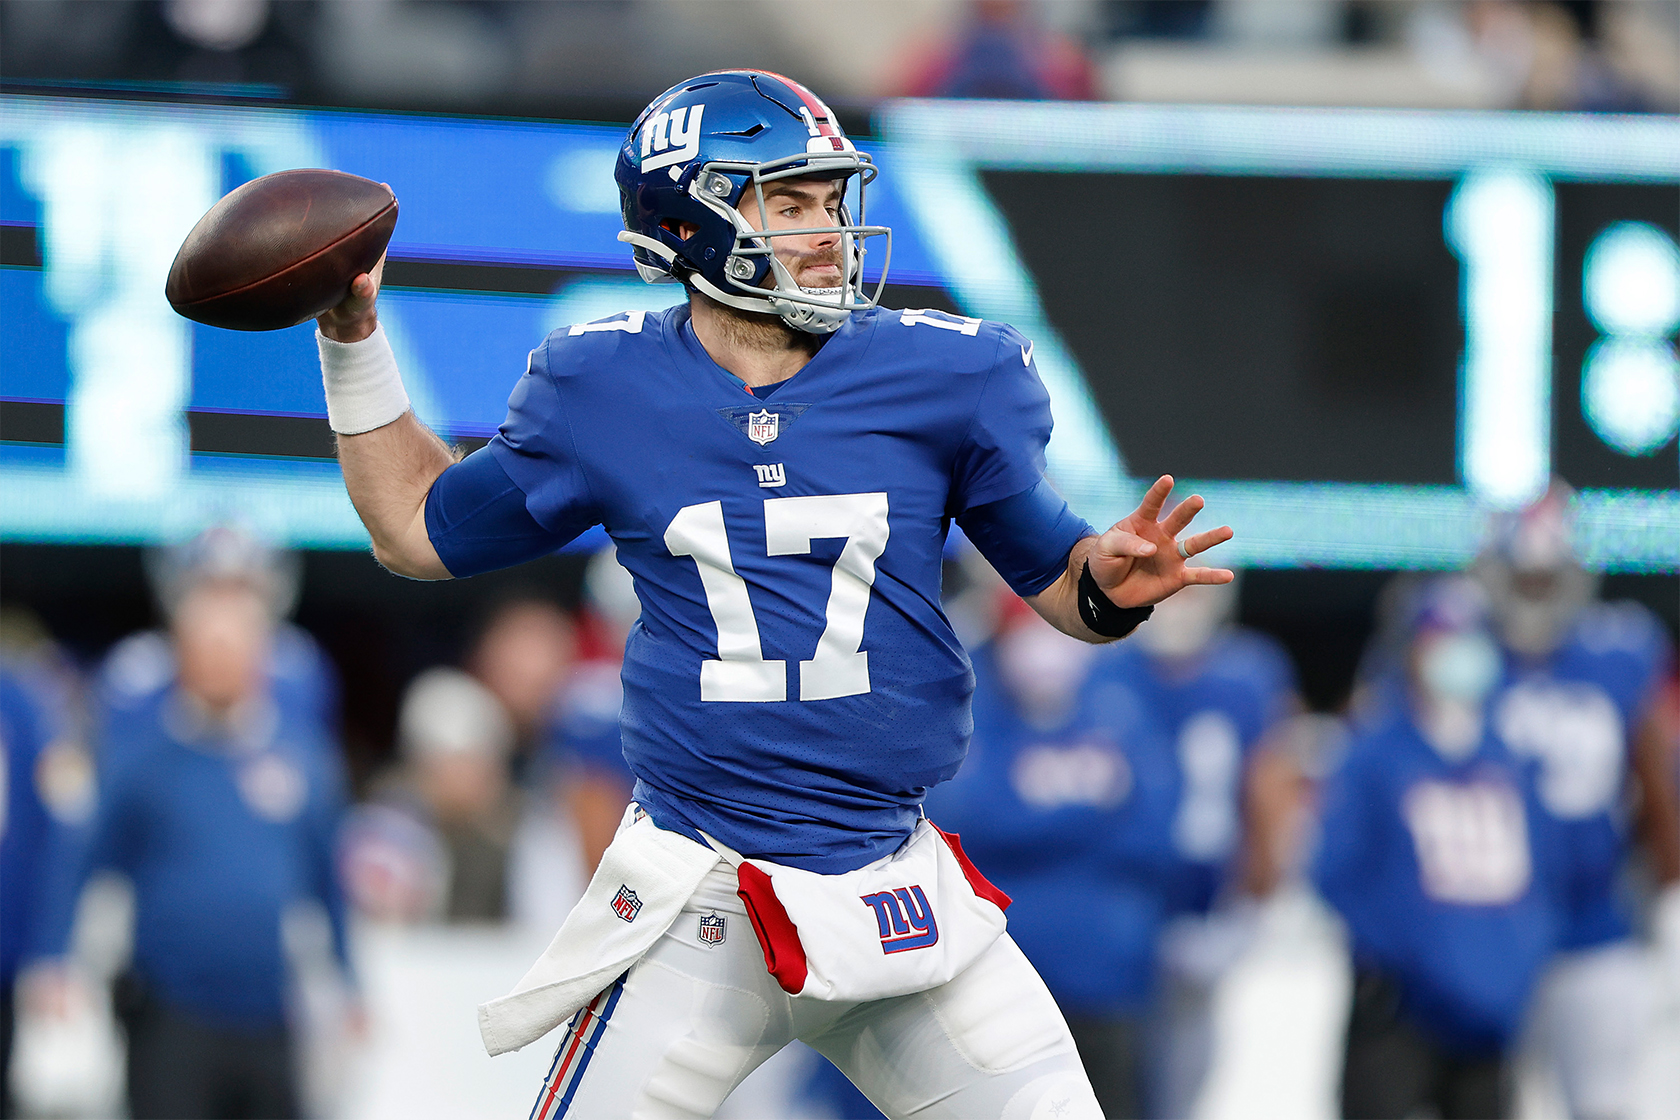 How to stream the Giants v Eagles game tonight